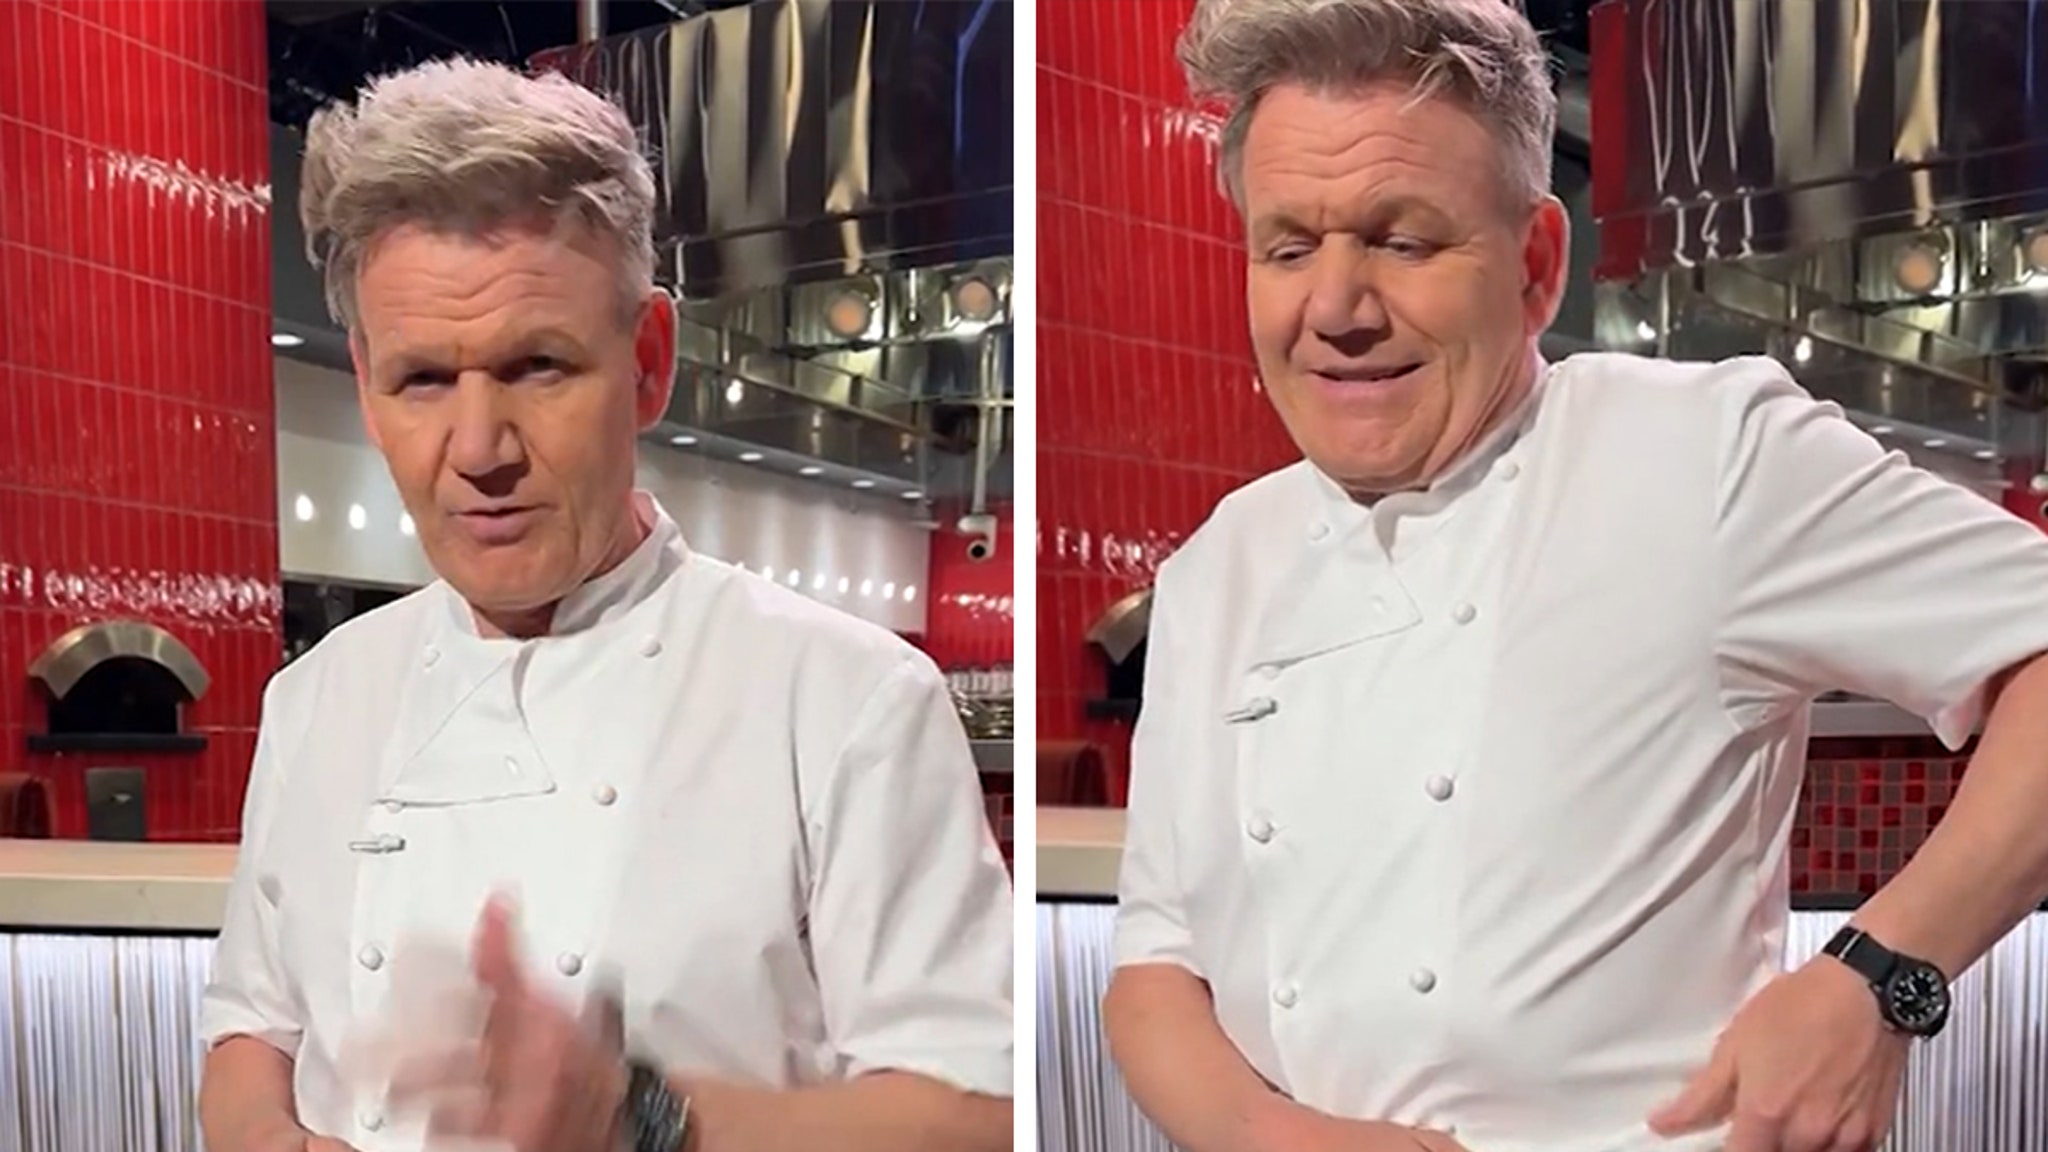 Gordon Ramsay shares video of horrific bruises after cycling accident